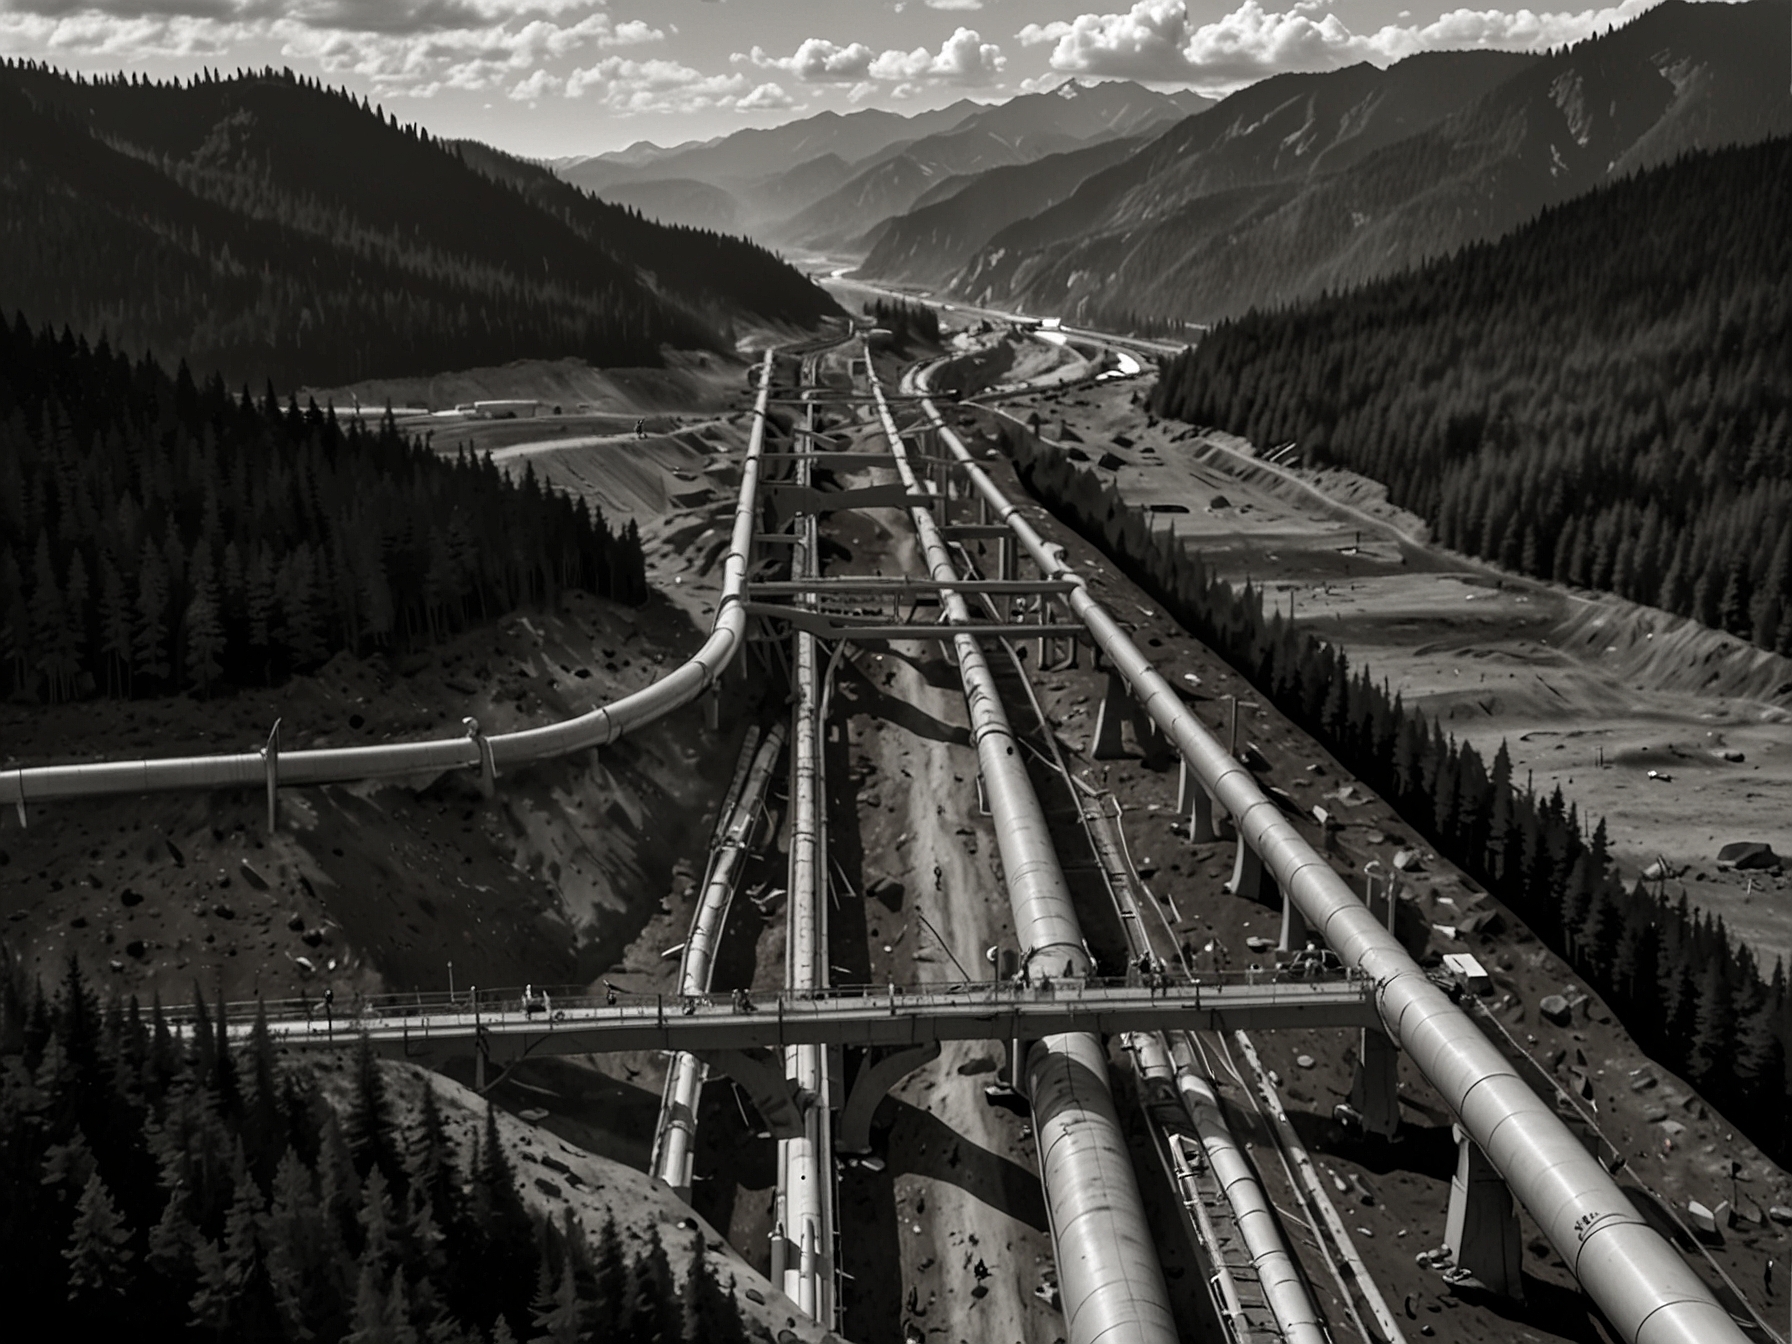 An aerial view of the Trans Mountain oil pipeline cutting through diverse terrains, highlighting the complex logistical challenges faced during its initial month of operation.